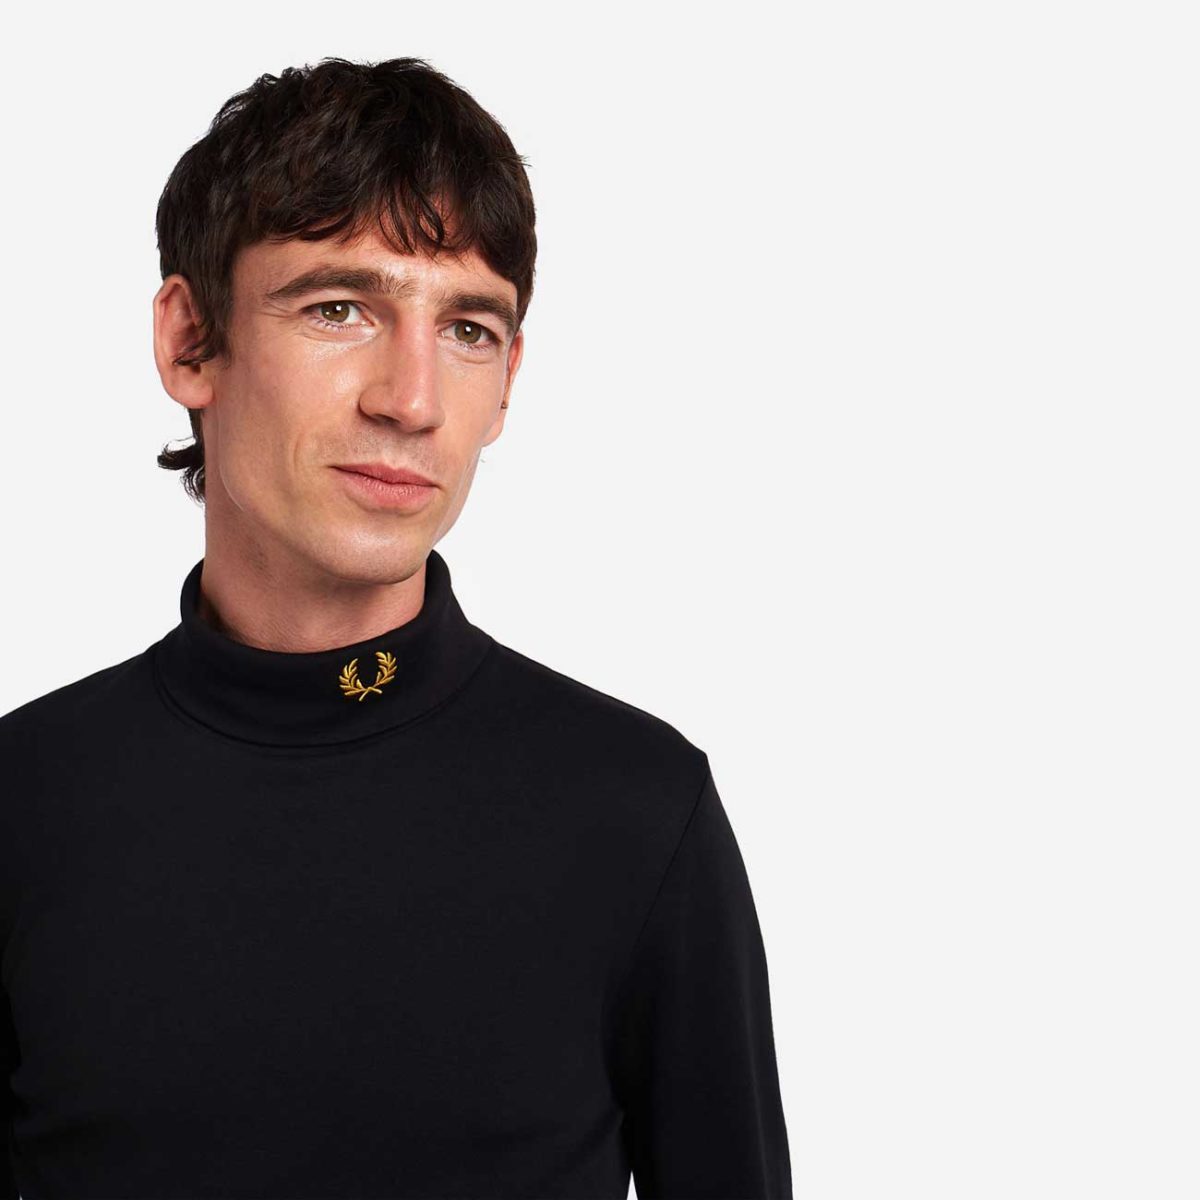 Fred Perry Roll Neck Long Sleeve Top - Black